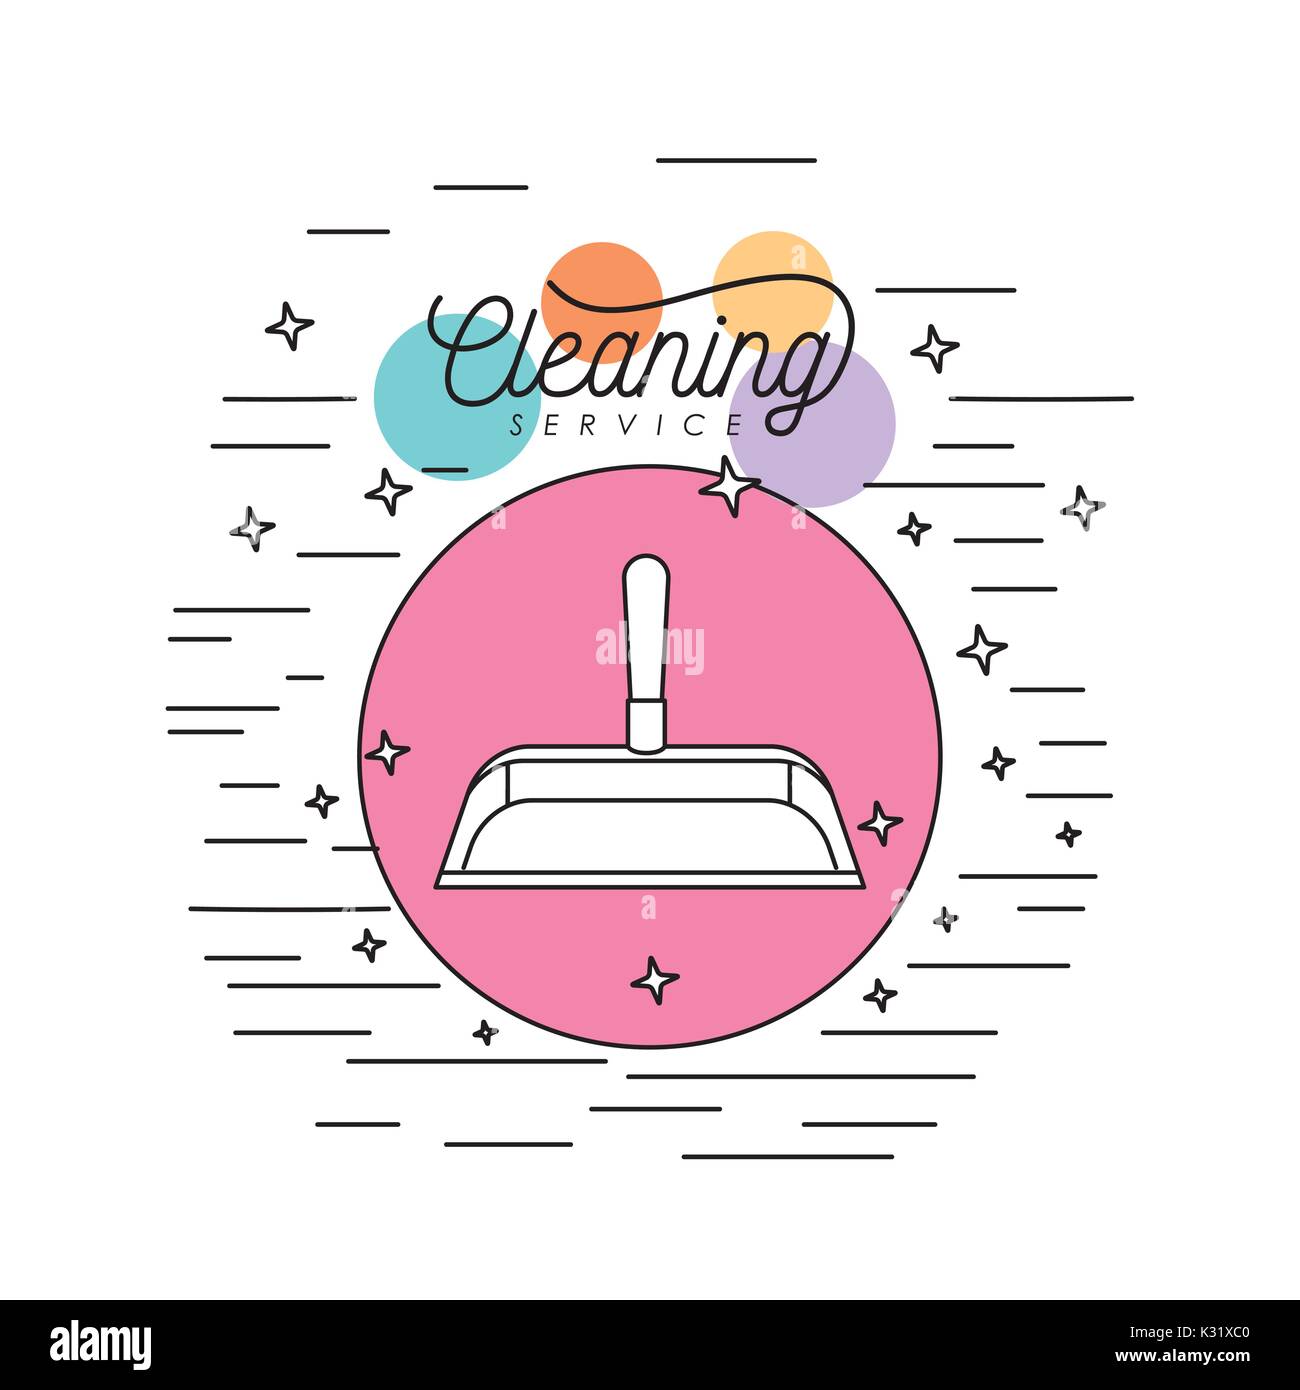 dust pan plastic silhouette cleaning service in circular frame with color bubbles and decorative stars and lines on white background Stock Vector